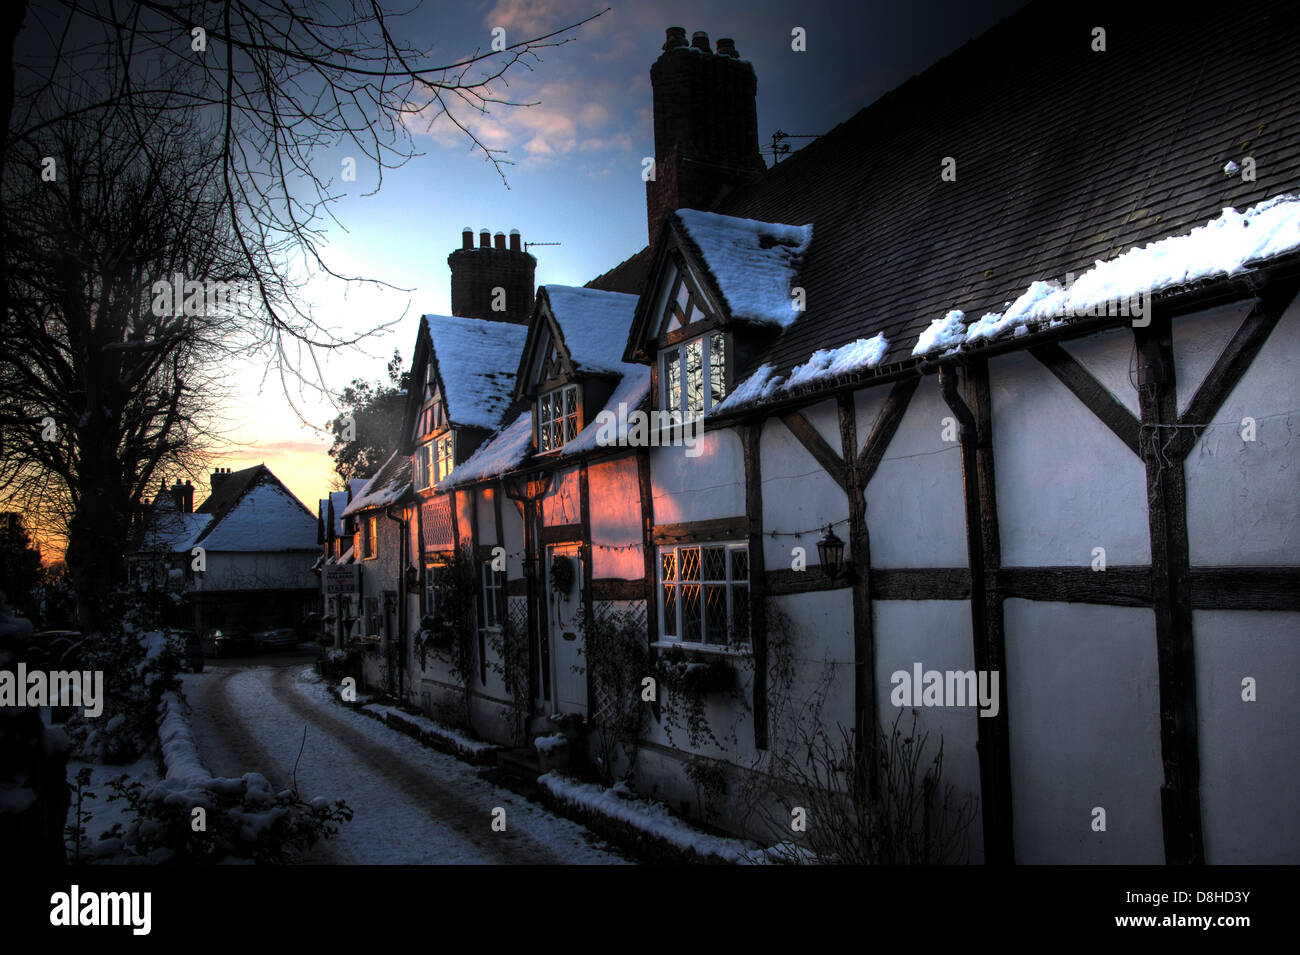 Great Budworth timber tudor thatched cottages In the snow, winter 2010, Northwich, Cheshire, England, UK. These are listed. Stock Photo